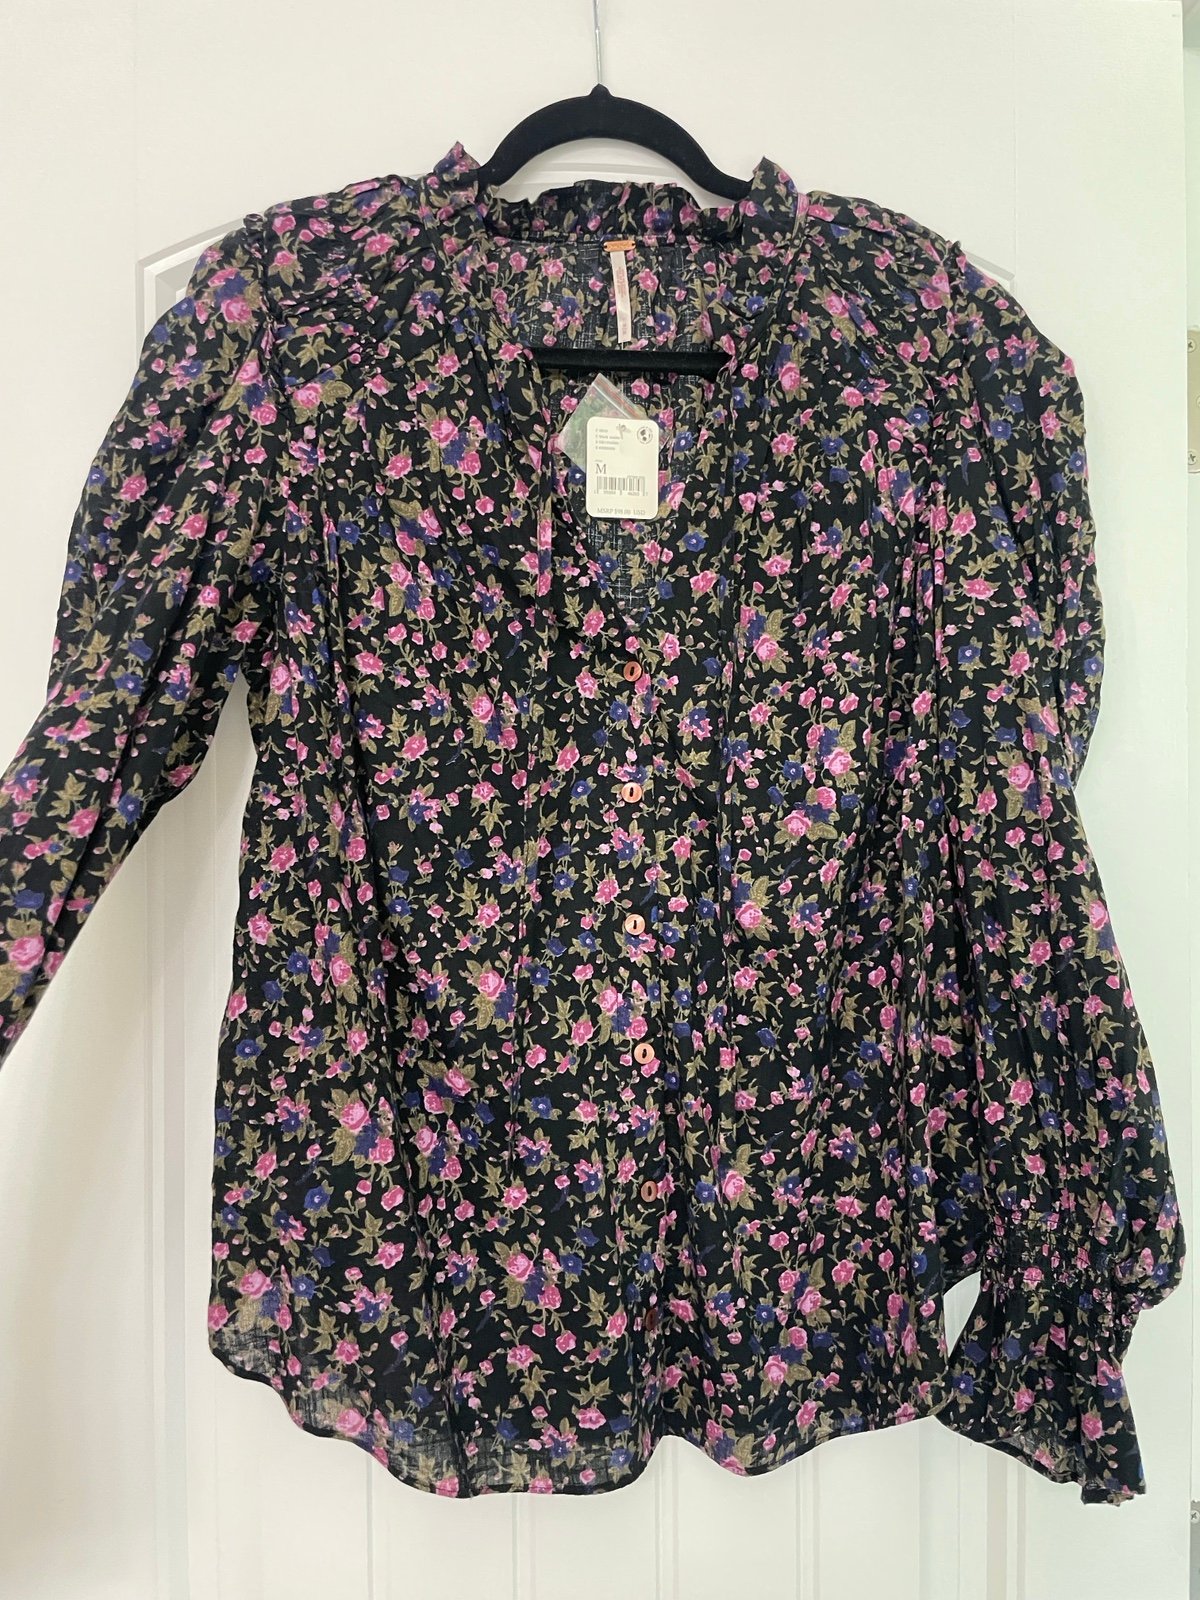 Authentic Free People button up blouse JDTLV5a8k for sa